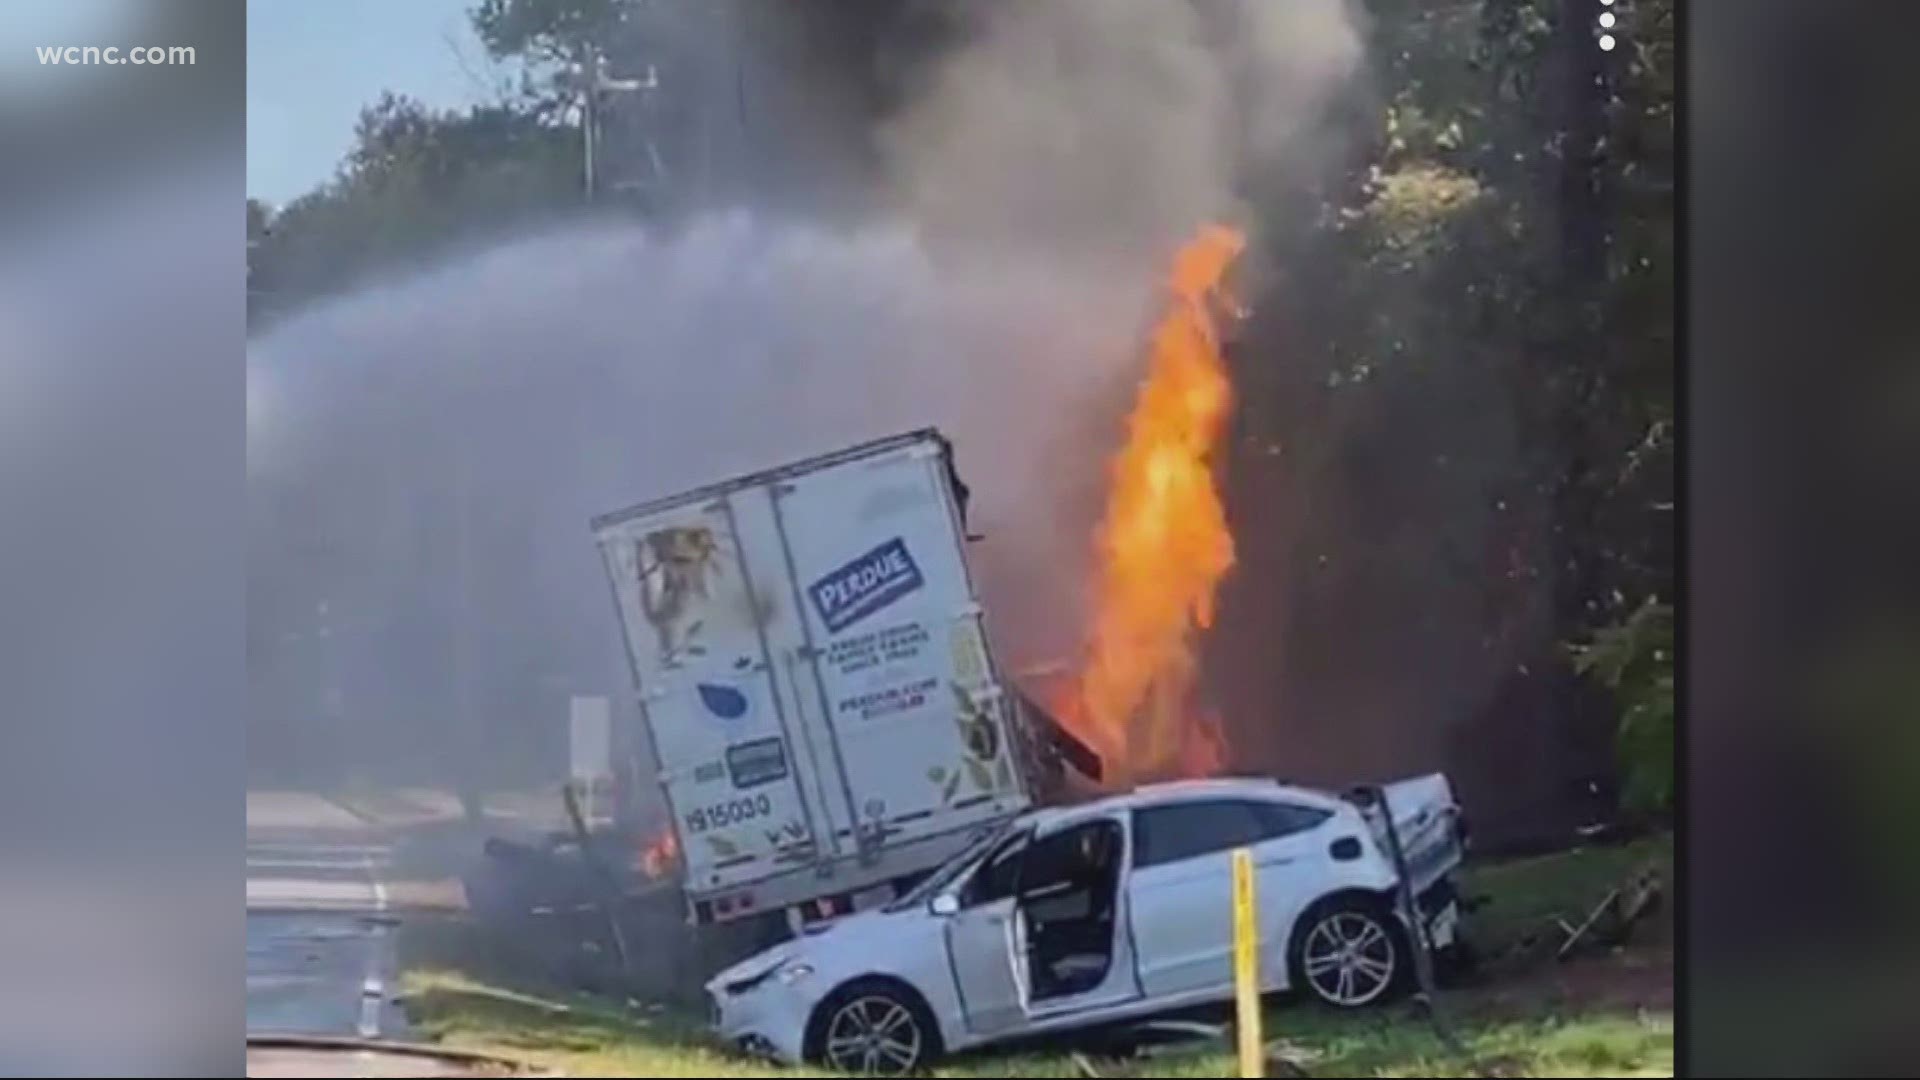 No injuries have been reported after a fiery tractor trailer crash in Concord.